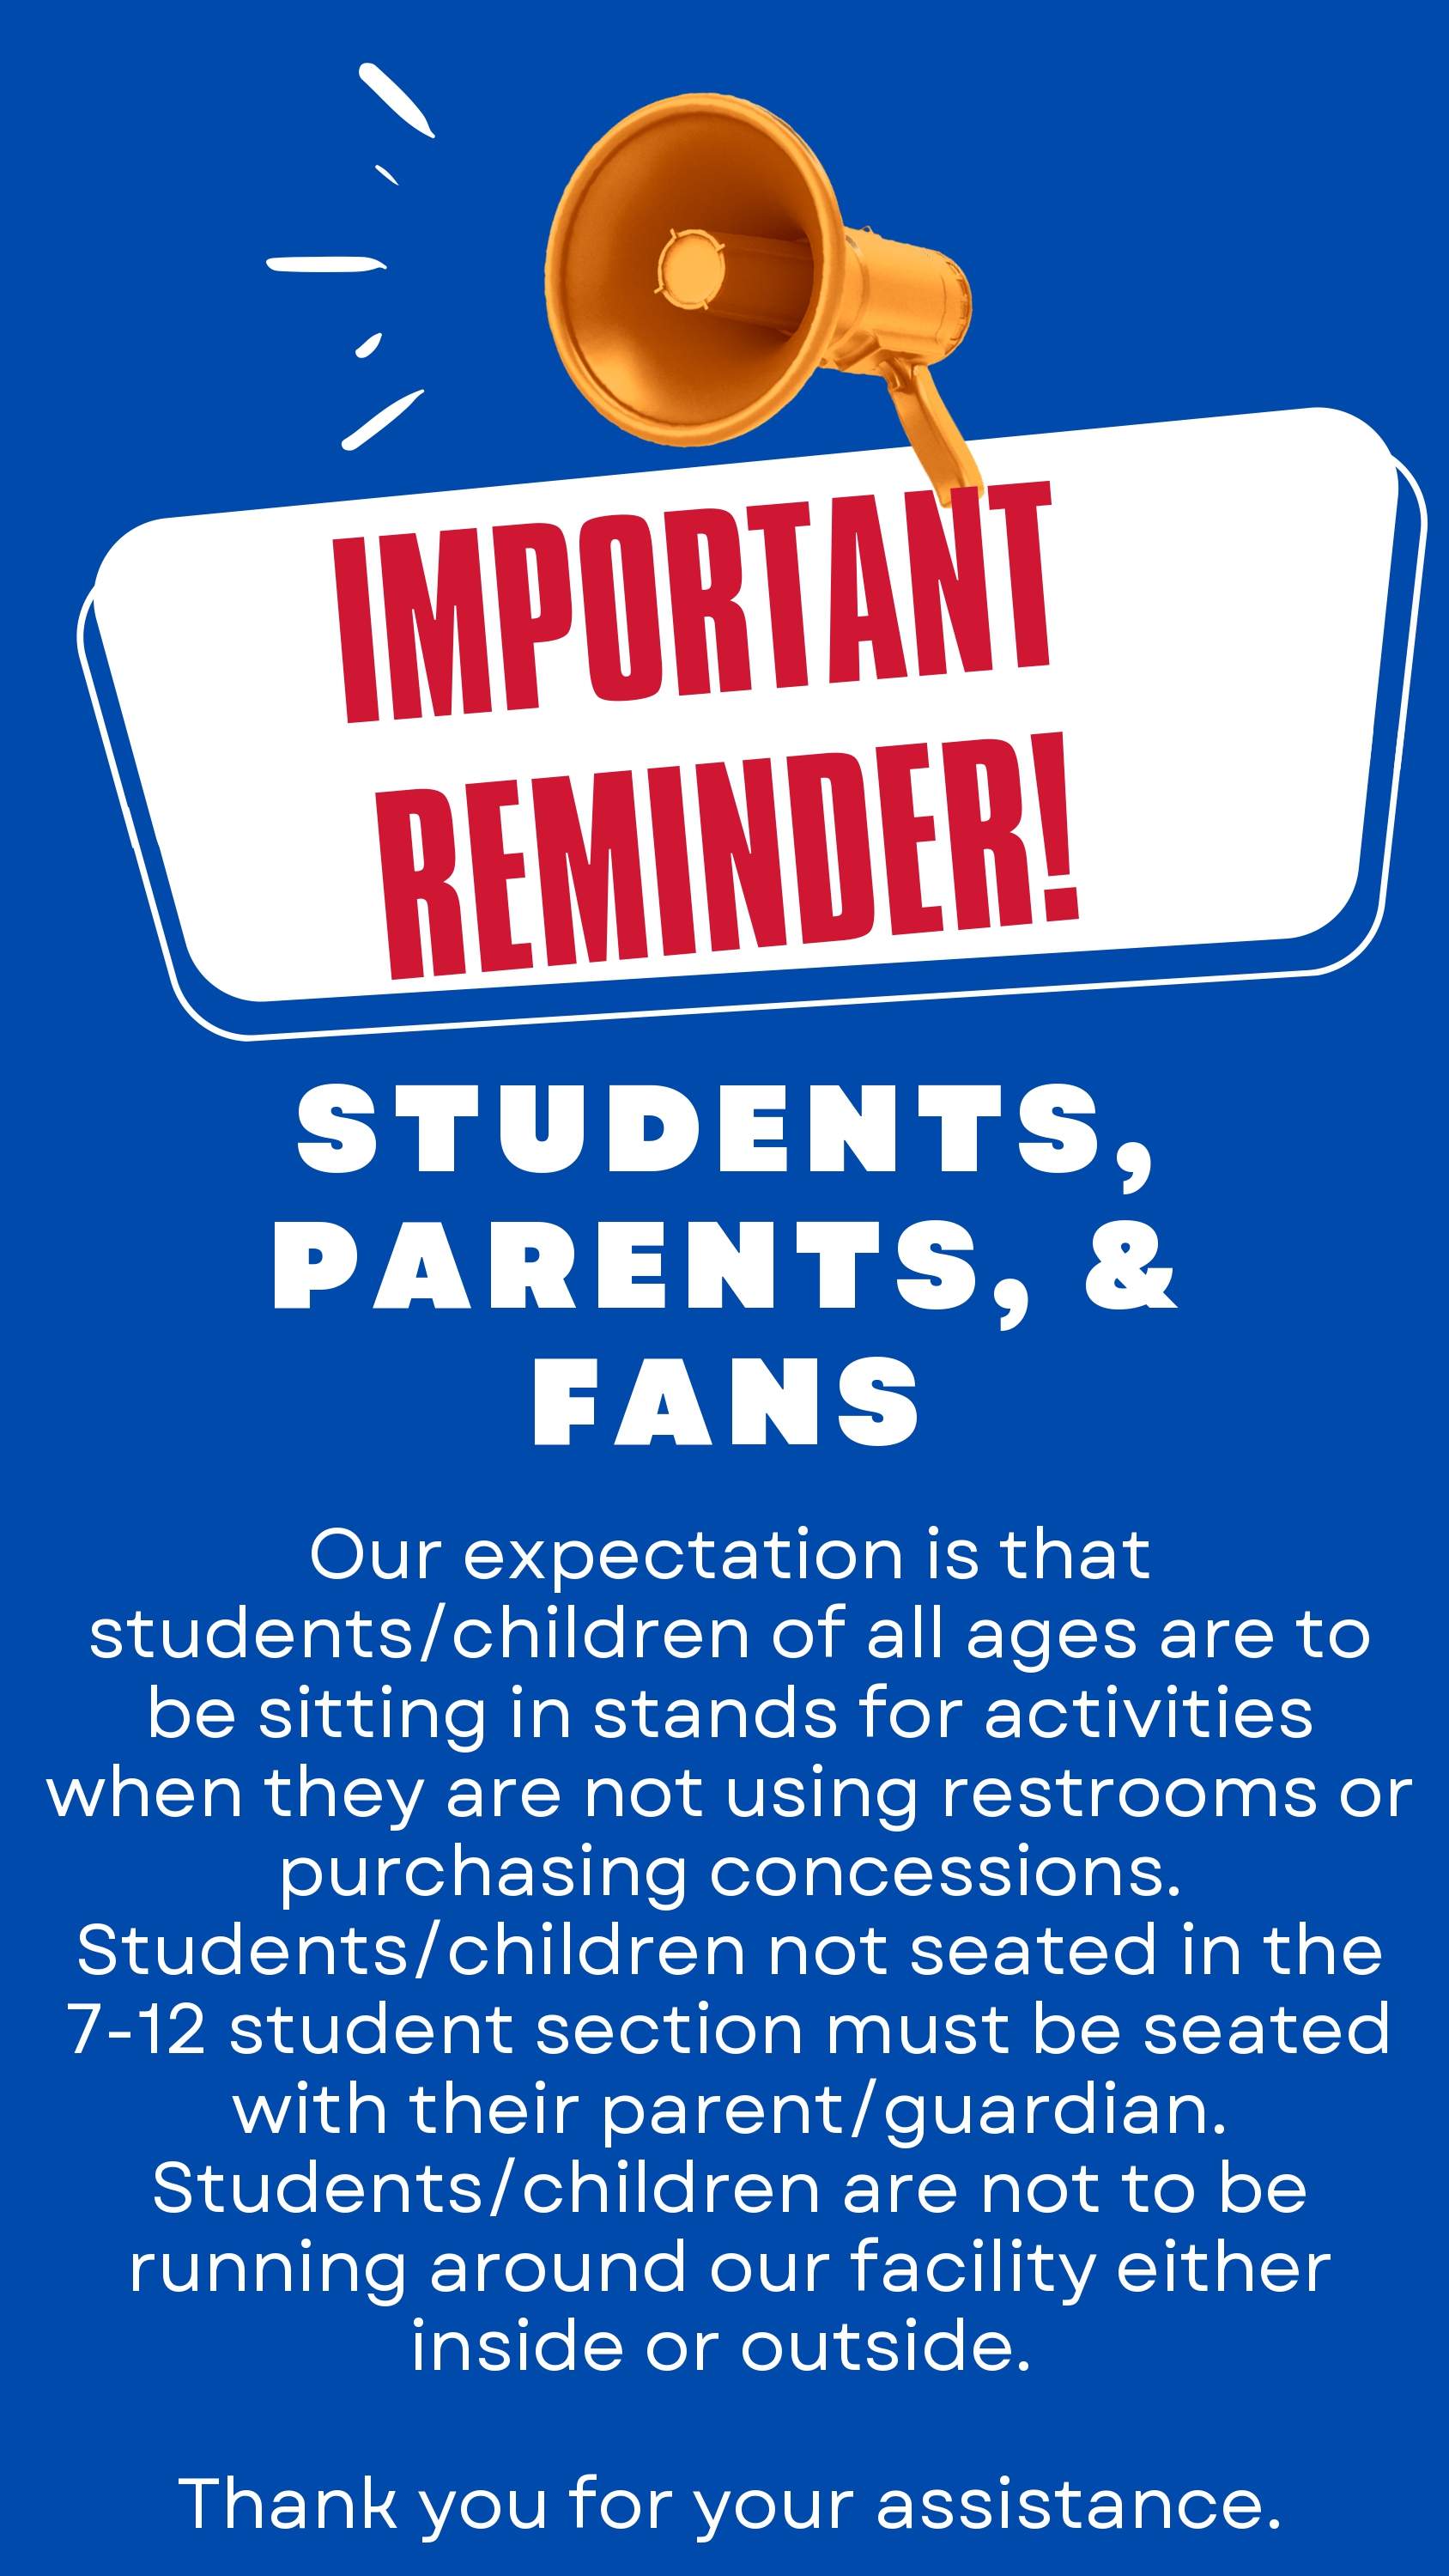 Important Reminder! Students, Parents, &Fans: students and children need to be sitting with their parents during activities and not running around.